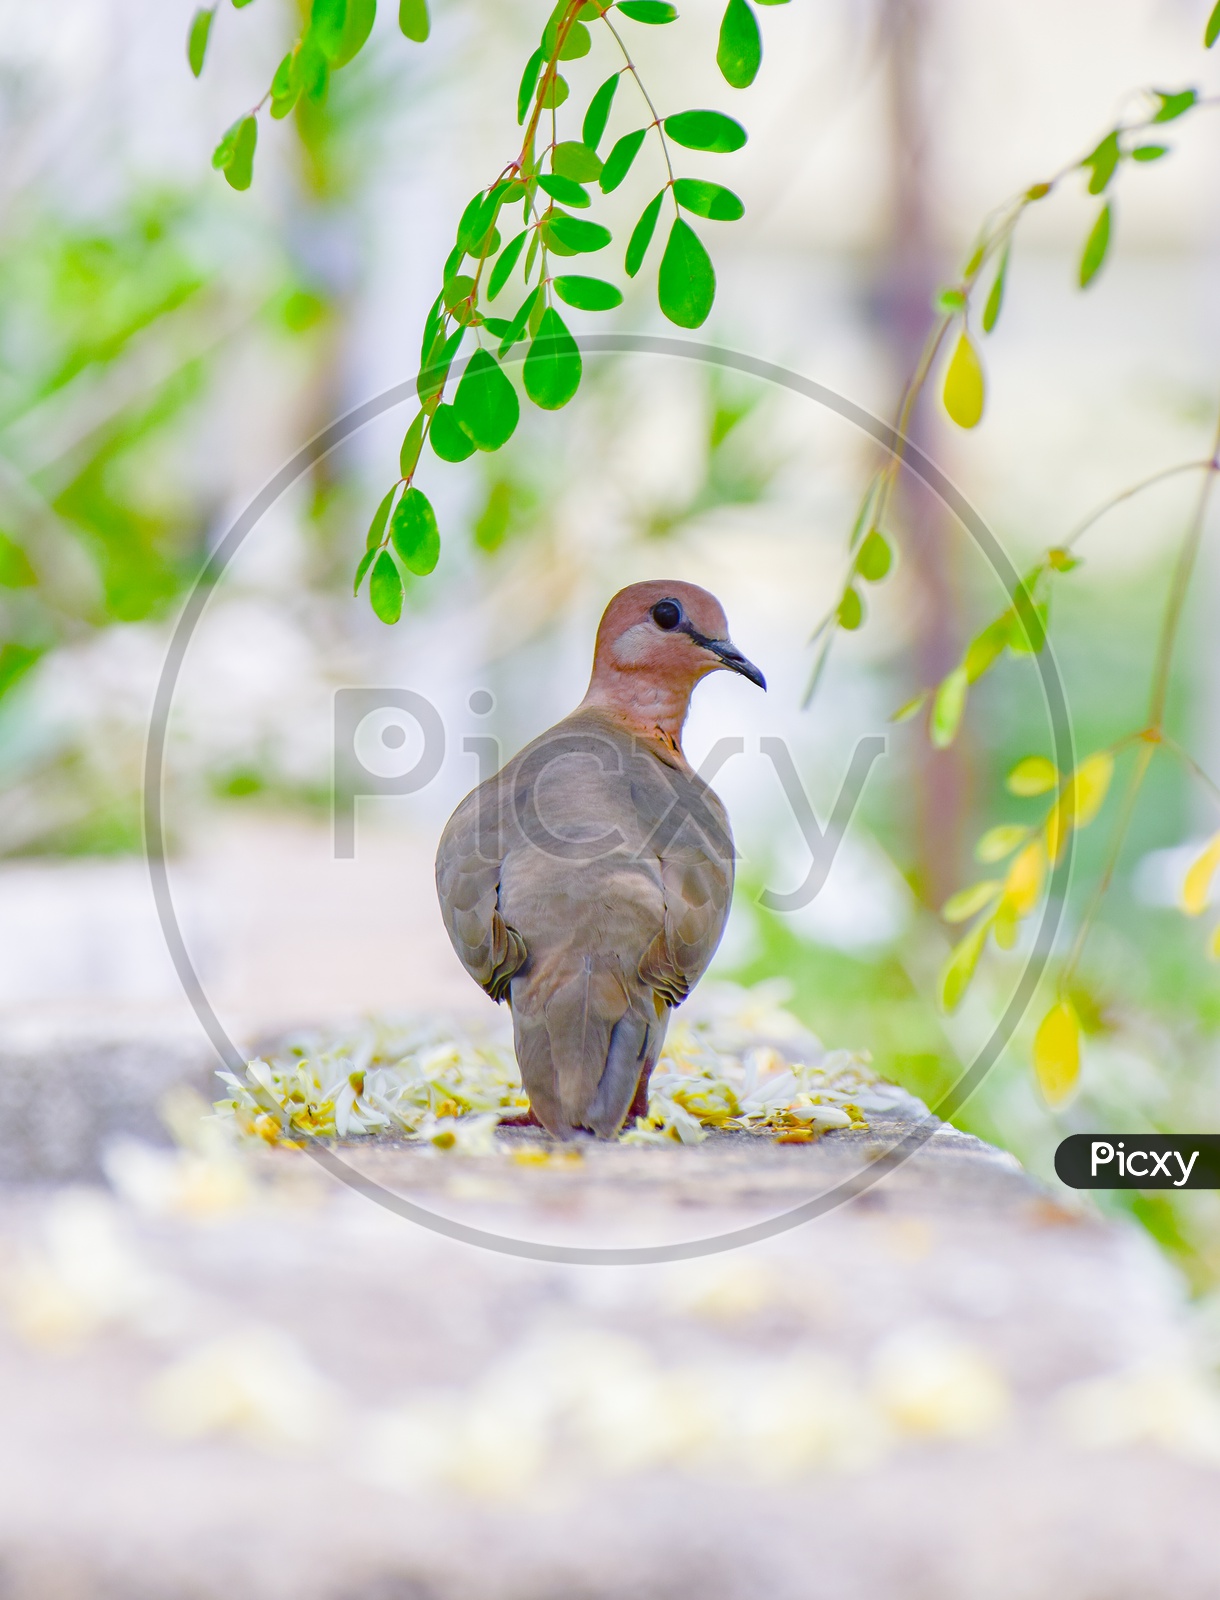 The Laughing Dove